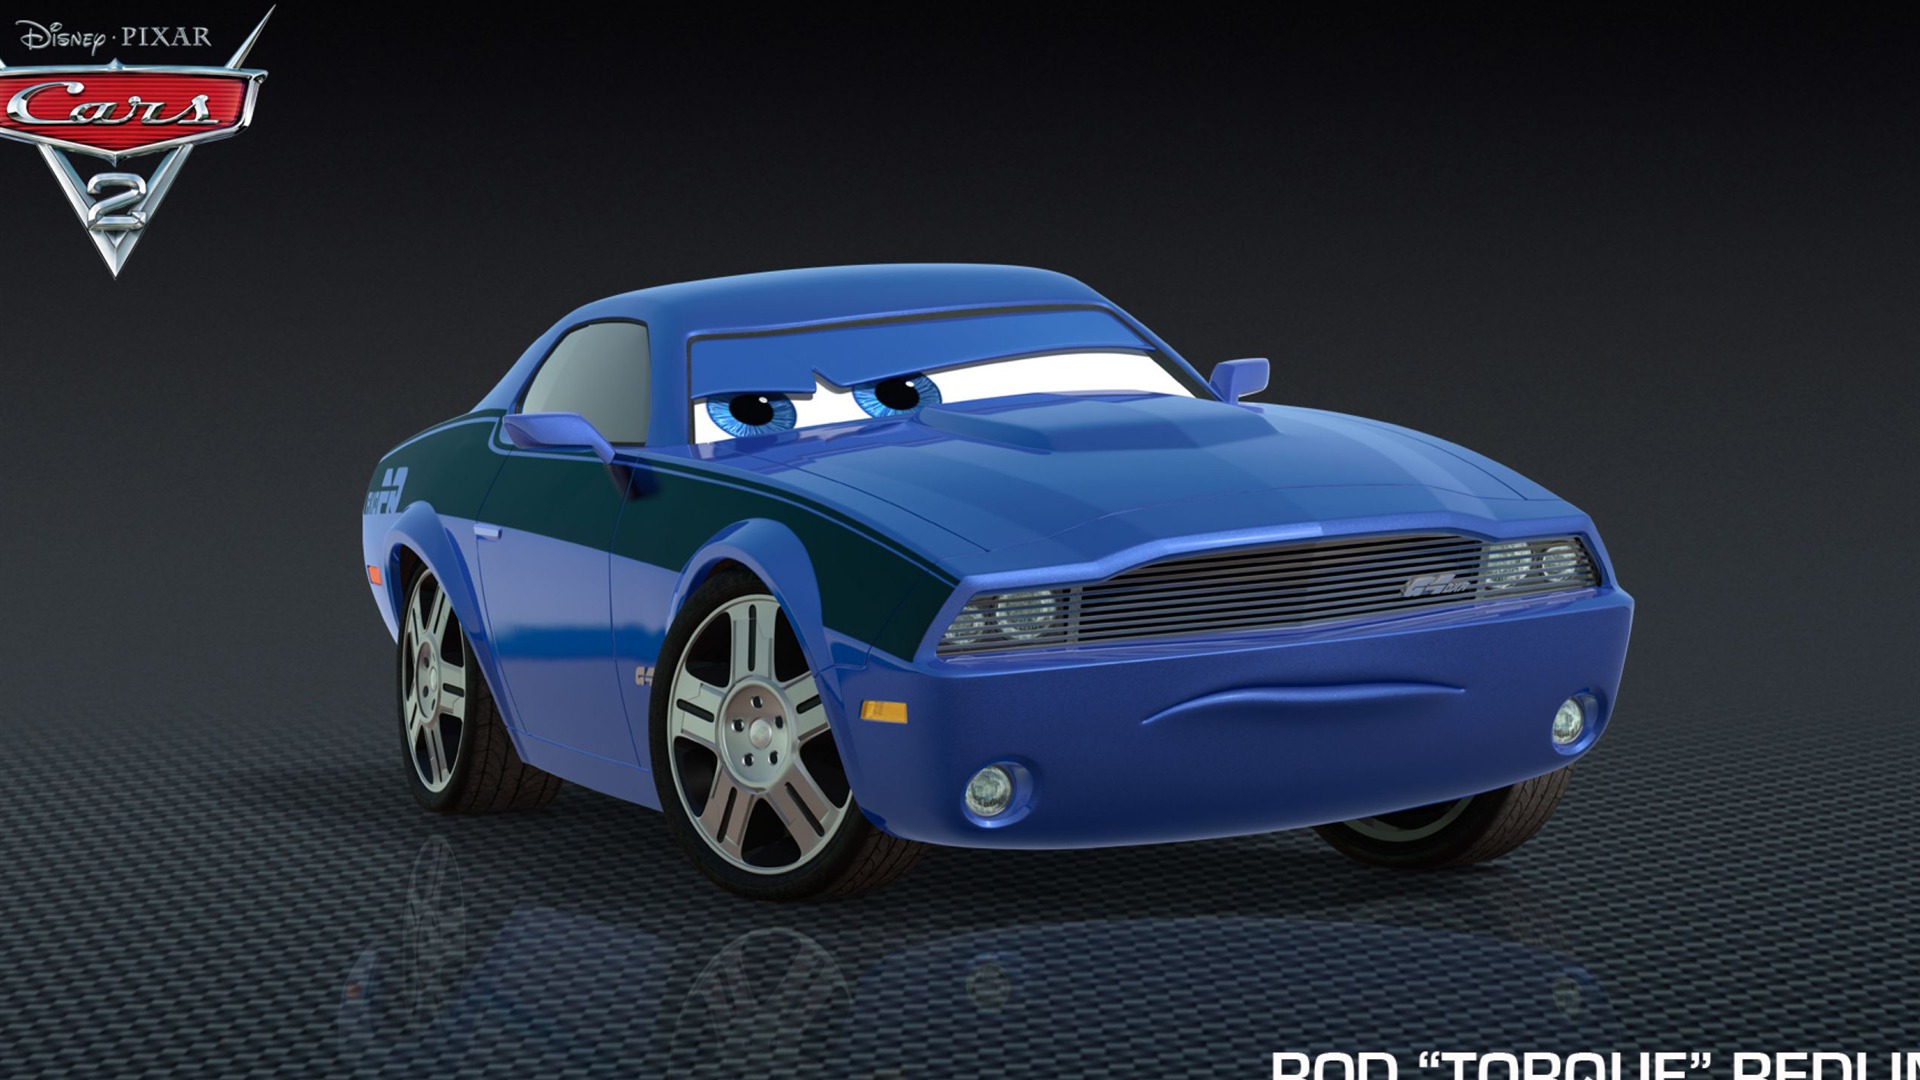 Cars 2 wallpapers #25 - 1920x1080